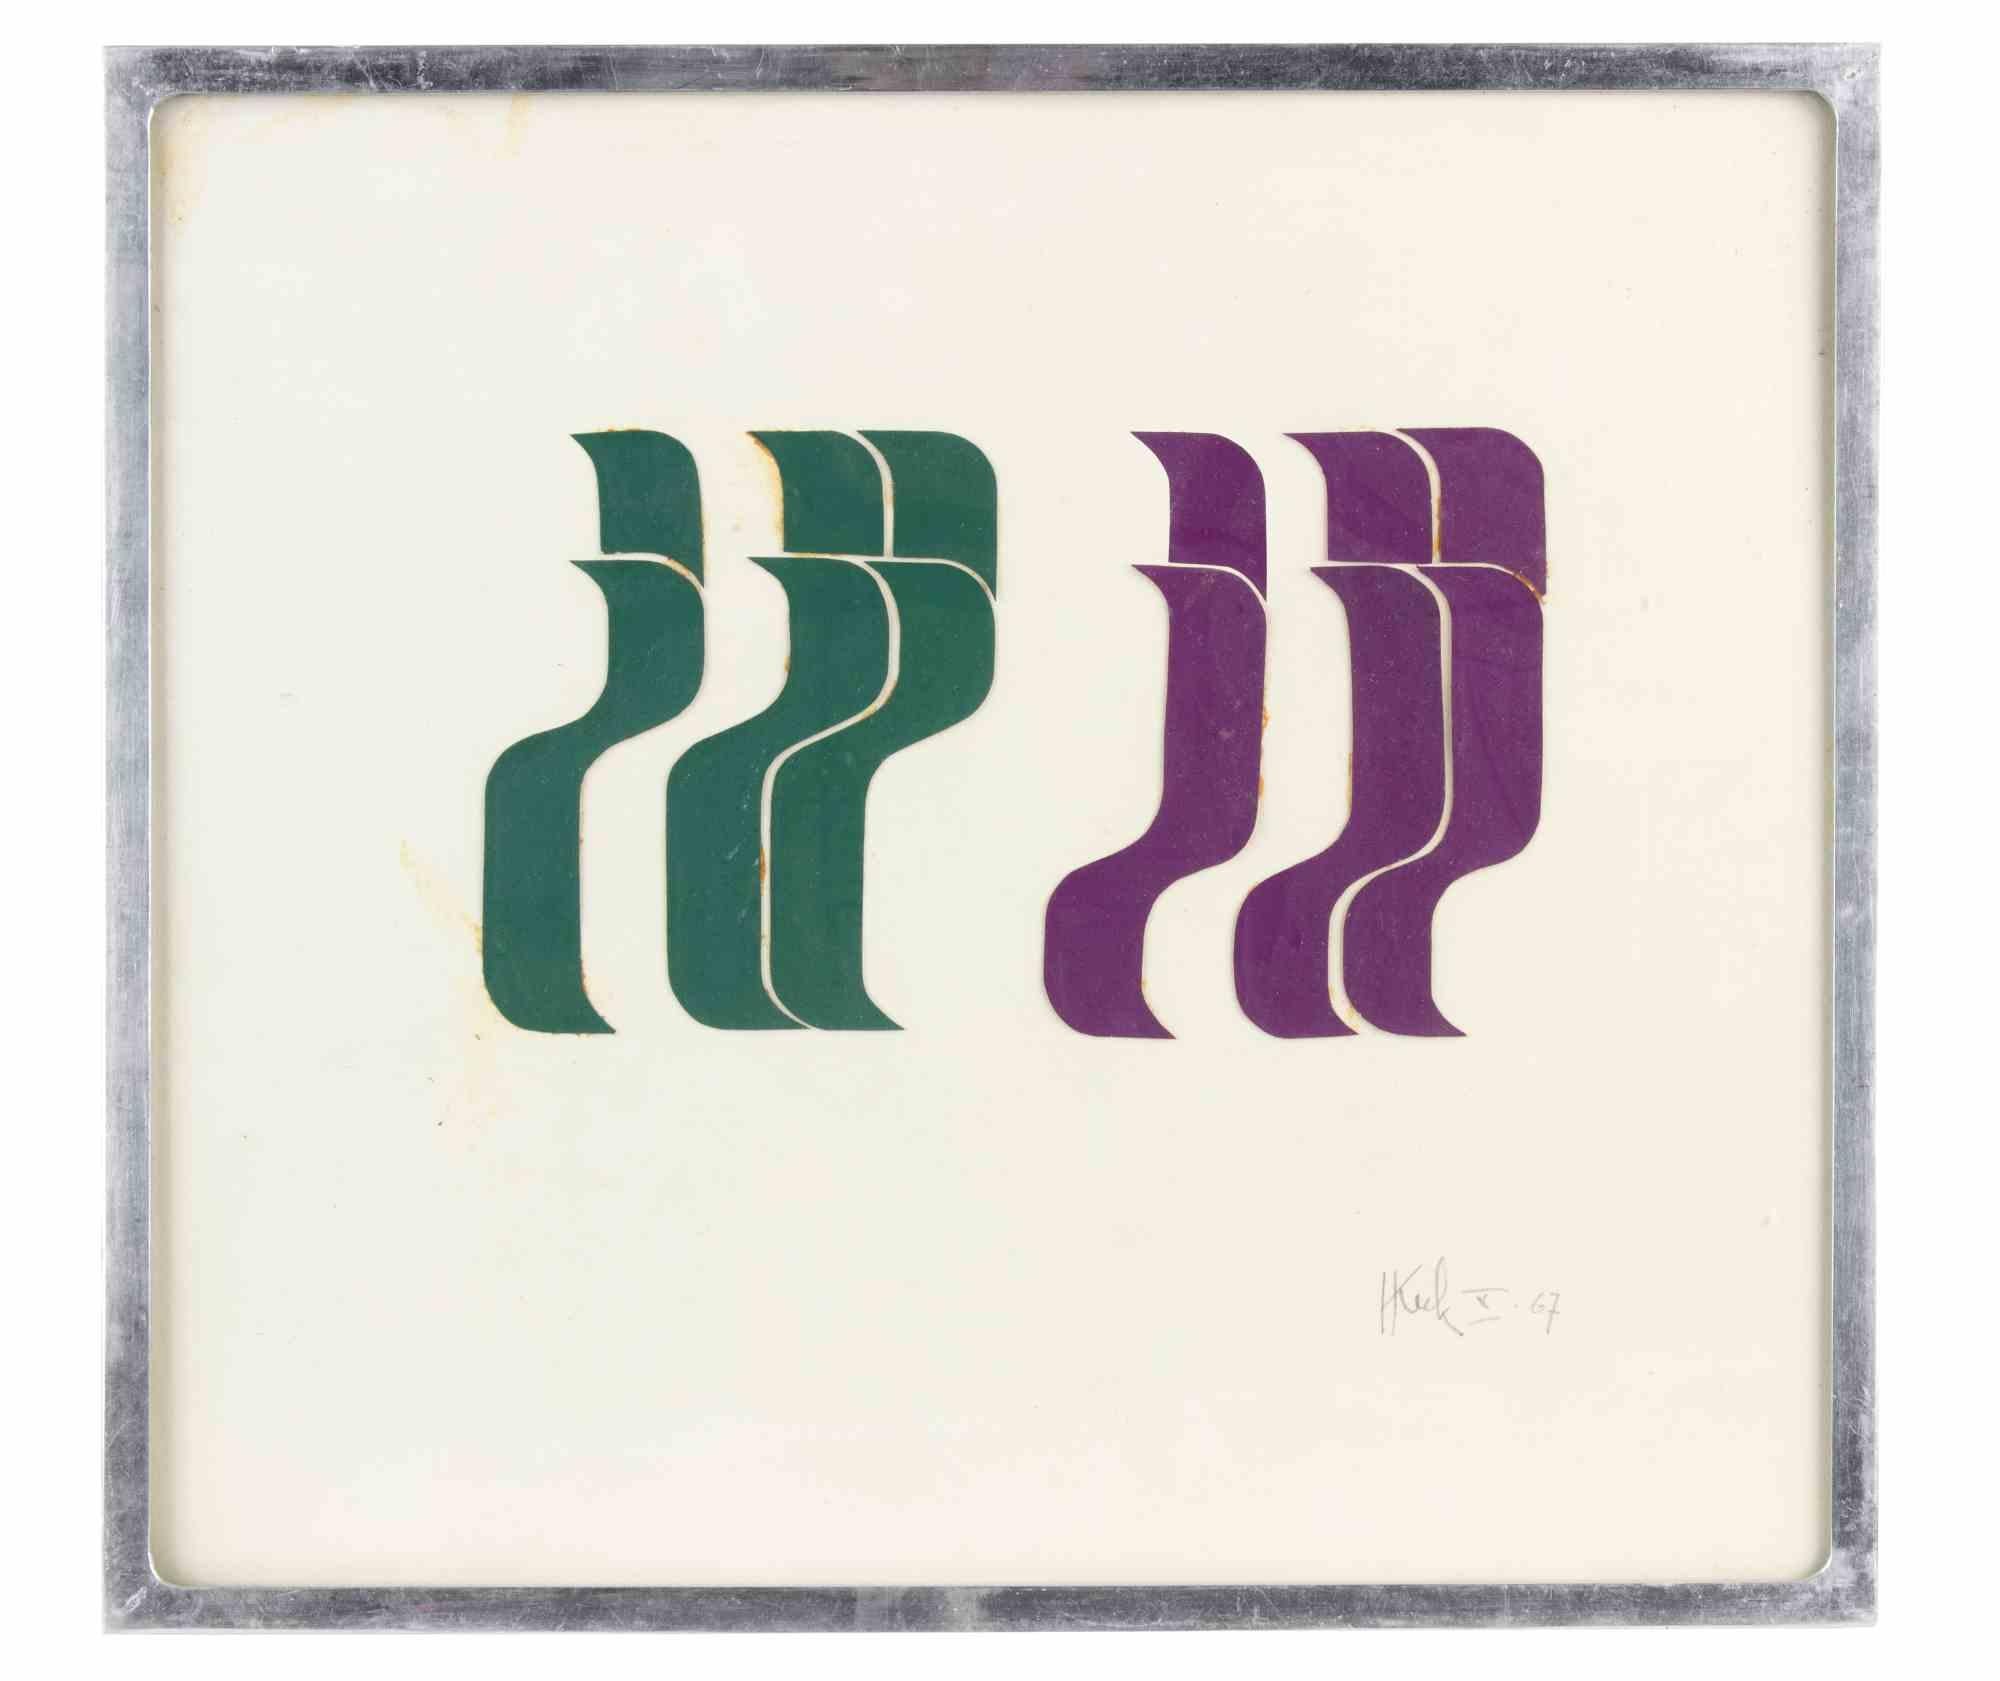 Abstract composition is a contemporary artwork realized by Hardu Keck in 1967

Mixed colored collage on paper.

Hand signed and dated on the lower margin.